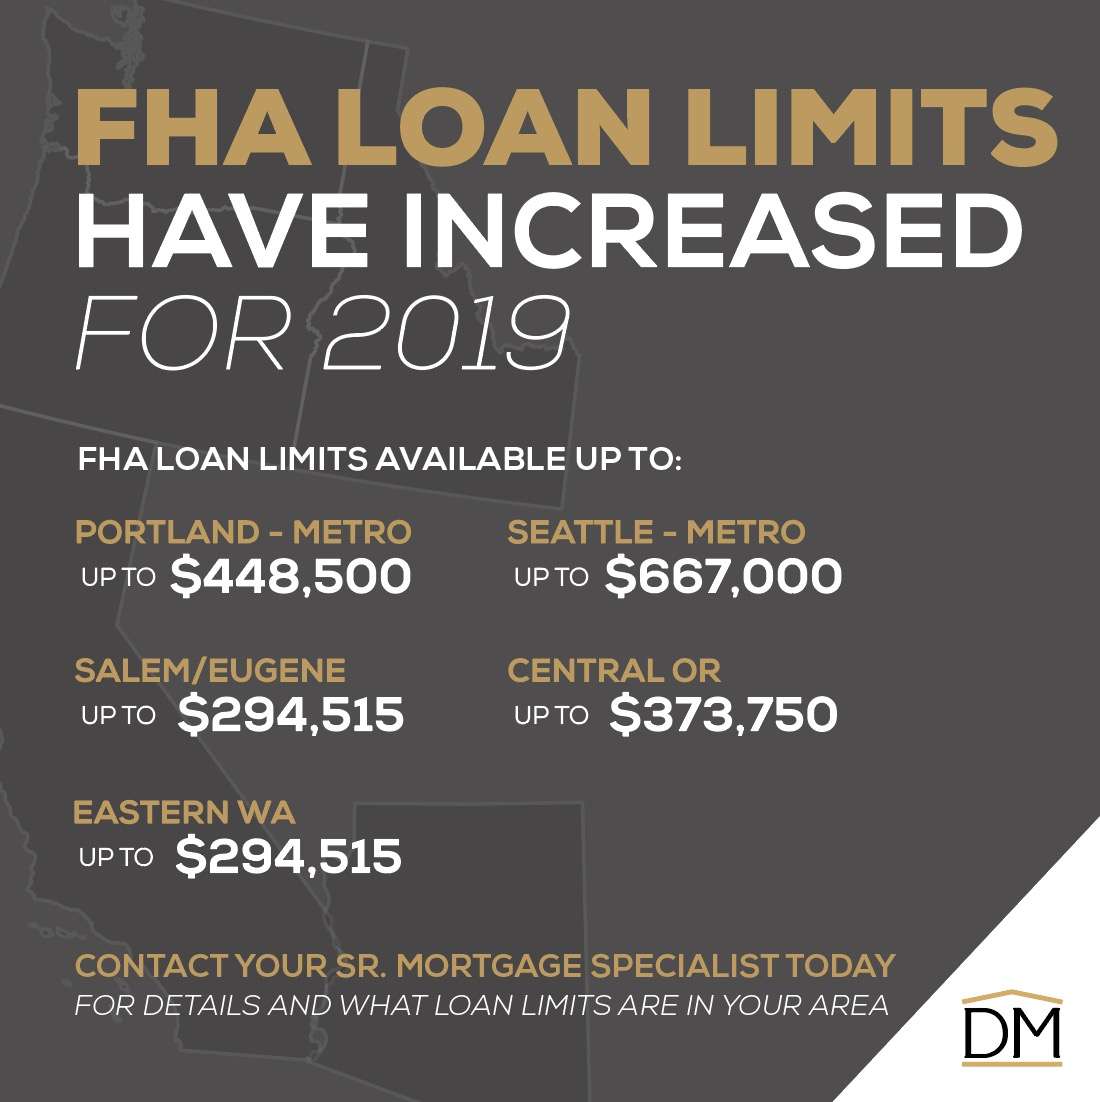 FHA Loan Limits To Increase In Most Of U.S. In 2019  Directors Mortgage